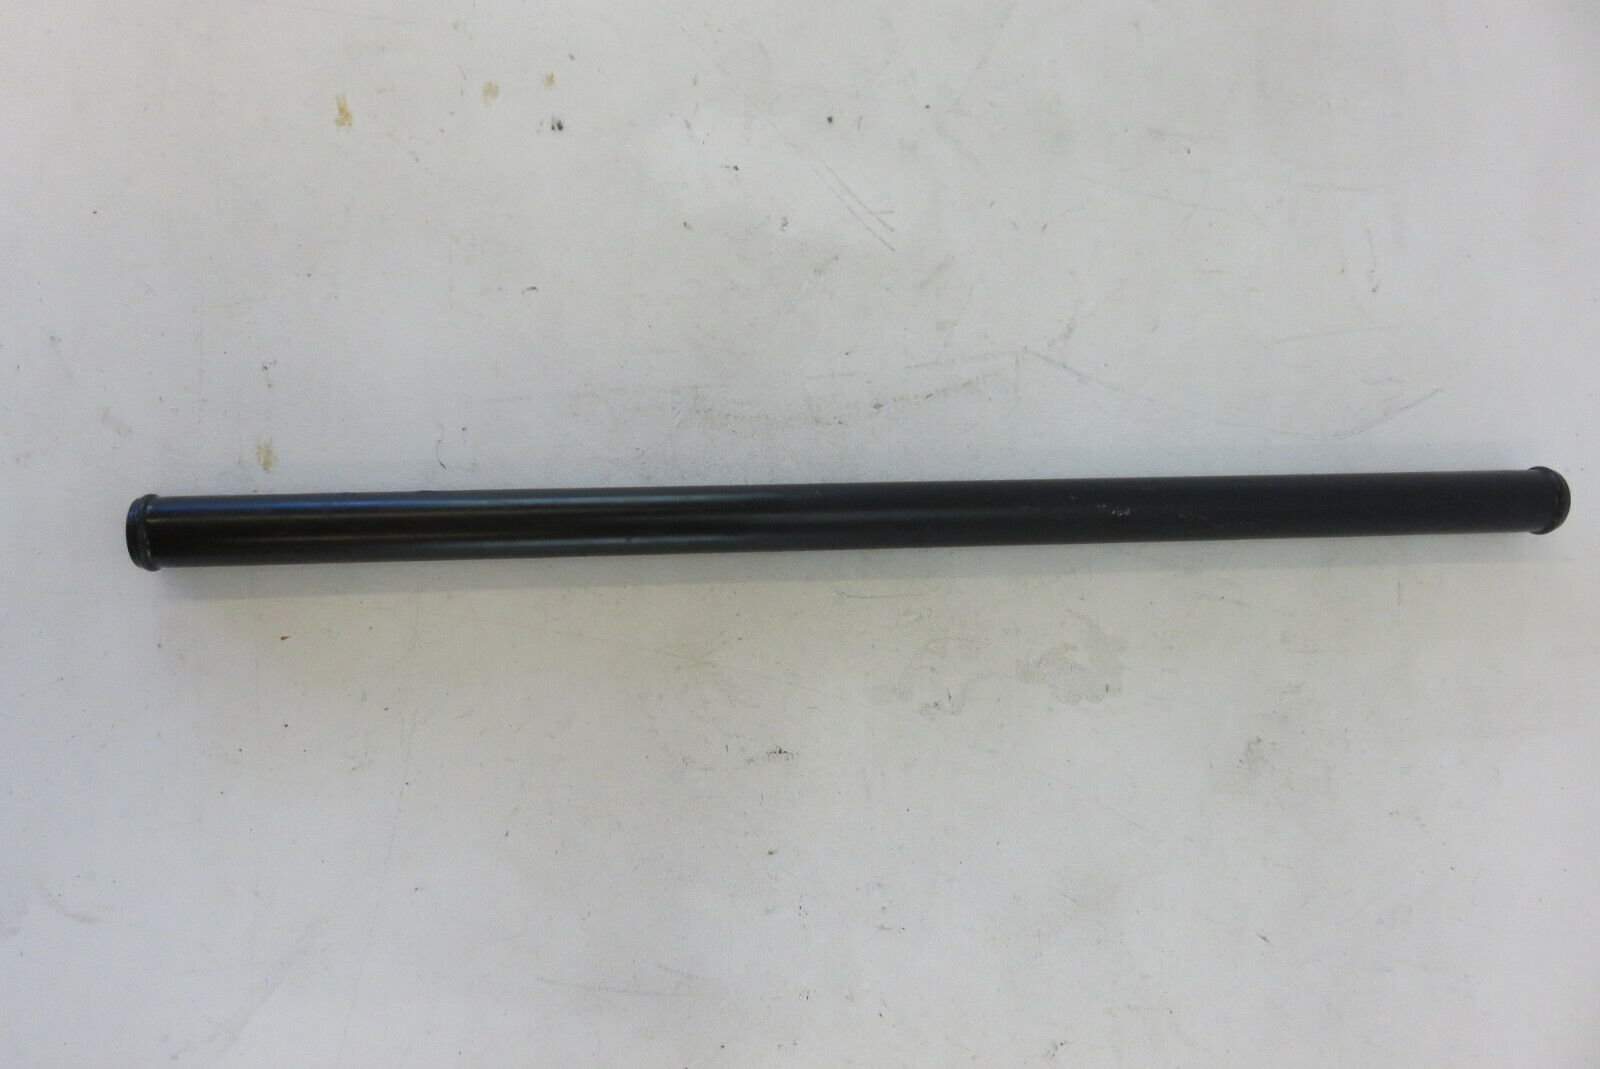 Lotus Esprit S4 pipe, crossover, fuel tank interconnection tube B082L4061F